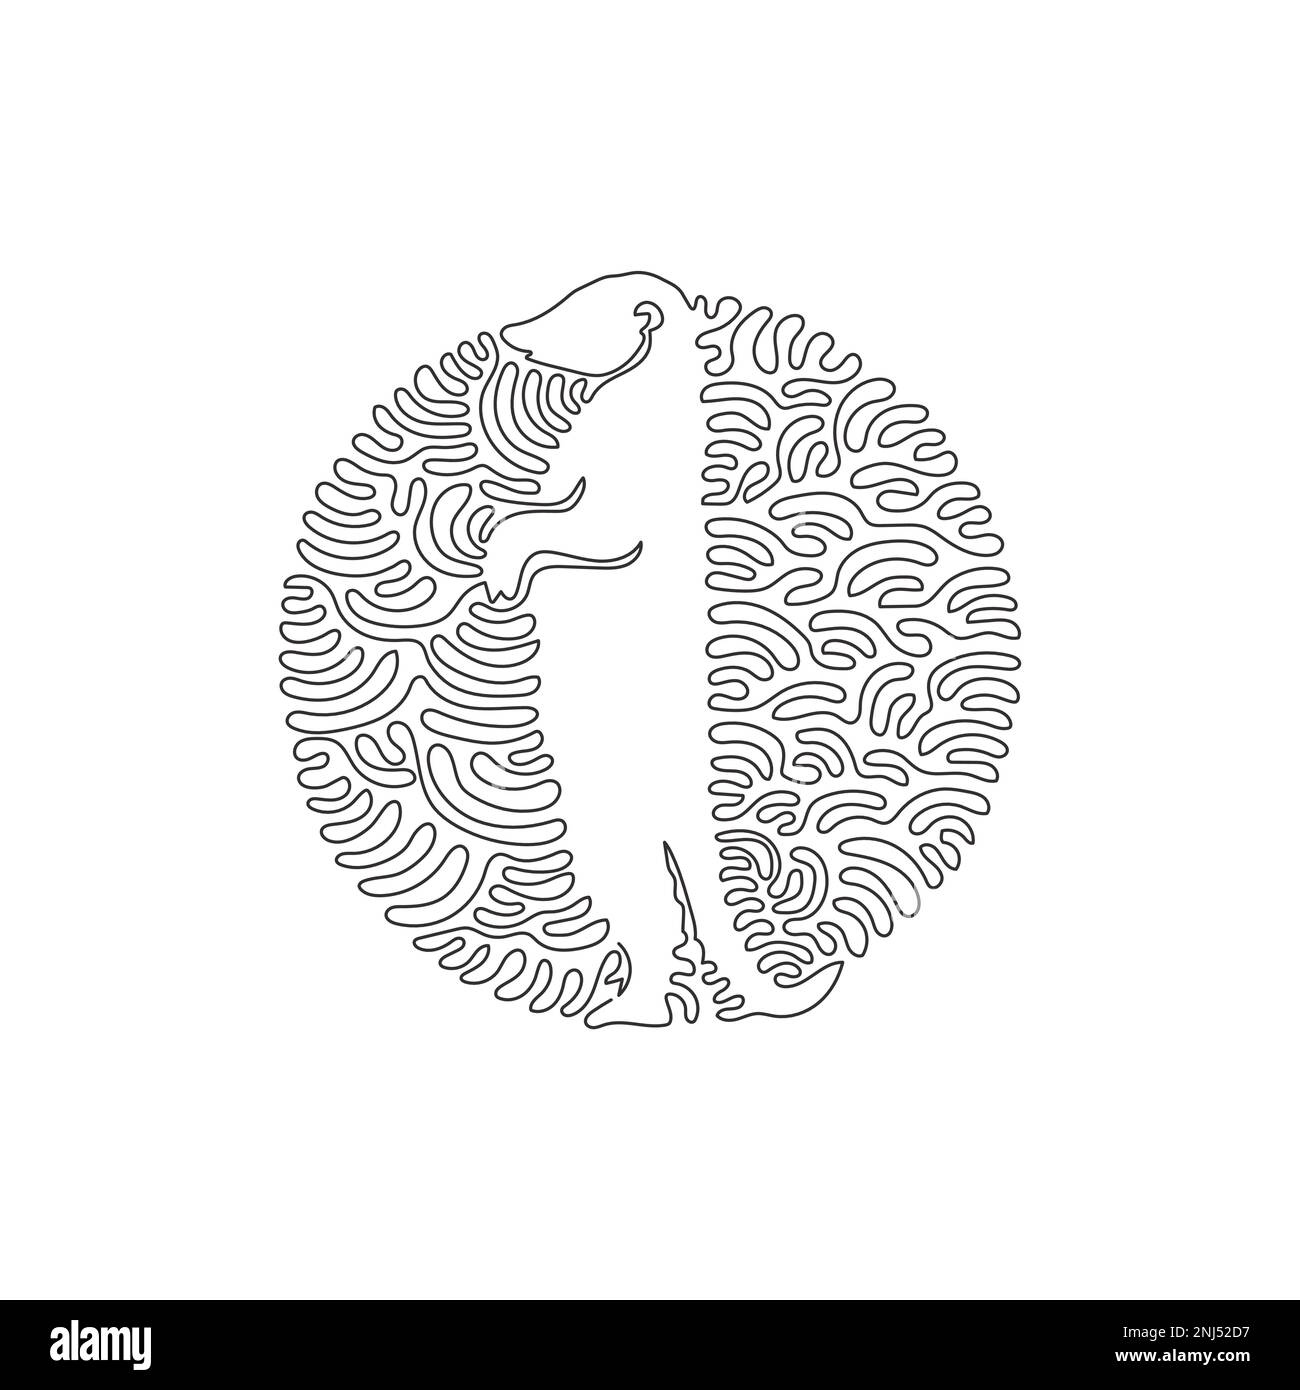 Single curly one line drawing of funny meerkat abstract art. Continuous line draw graphic design vector illustration of omnivorous mammal Stock Vector